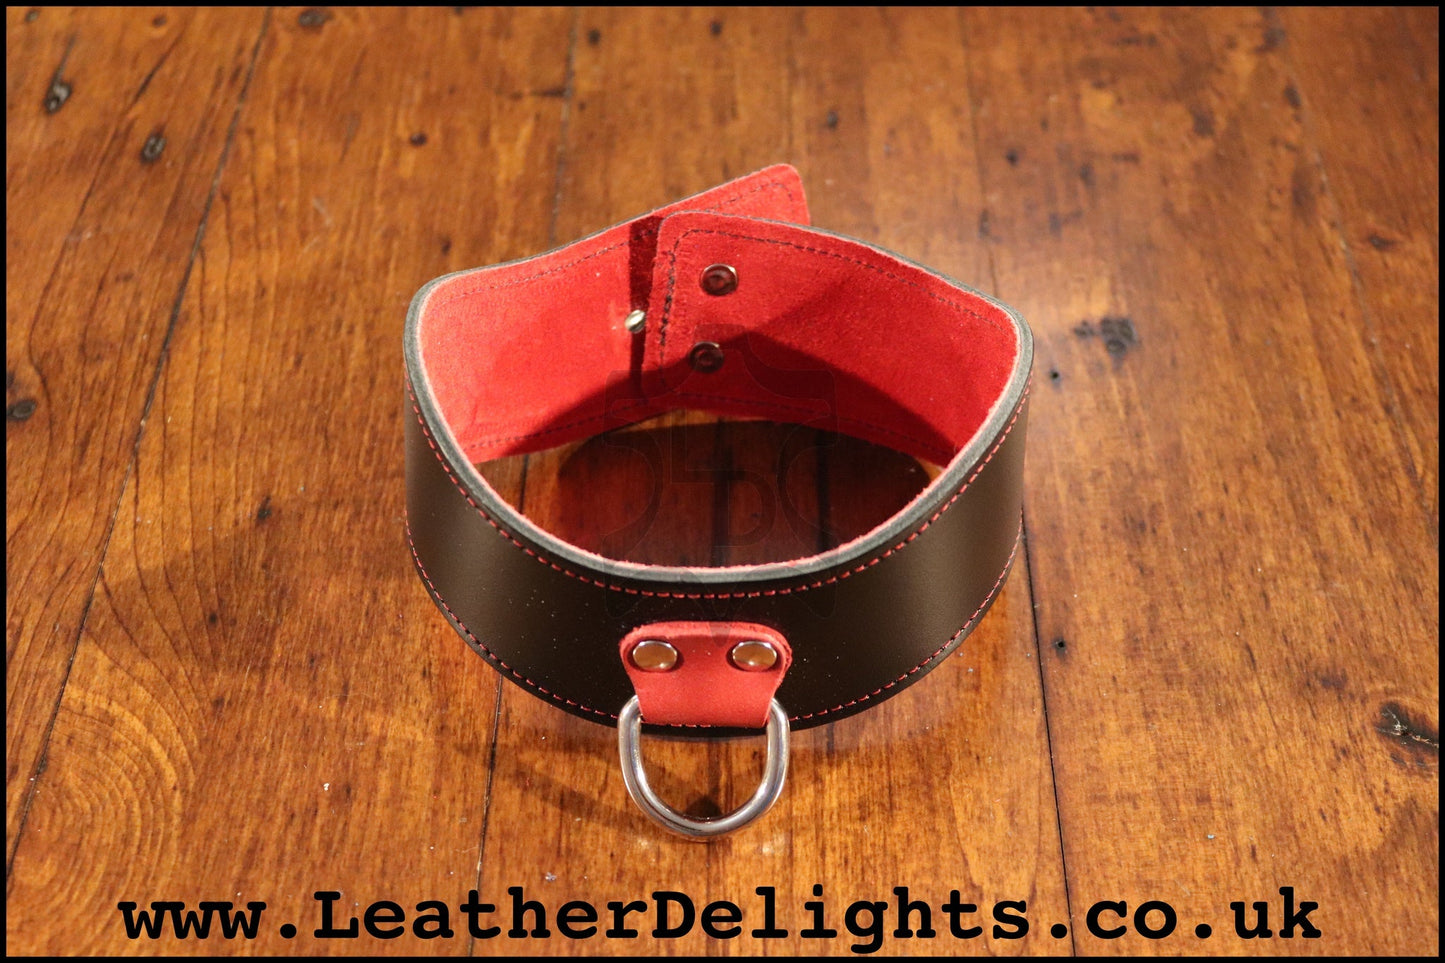 2" Wide Contour Collar with Welded D Ring - Leather Delights